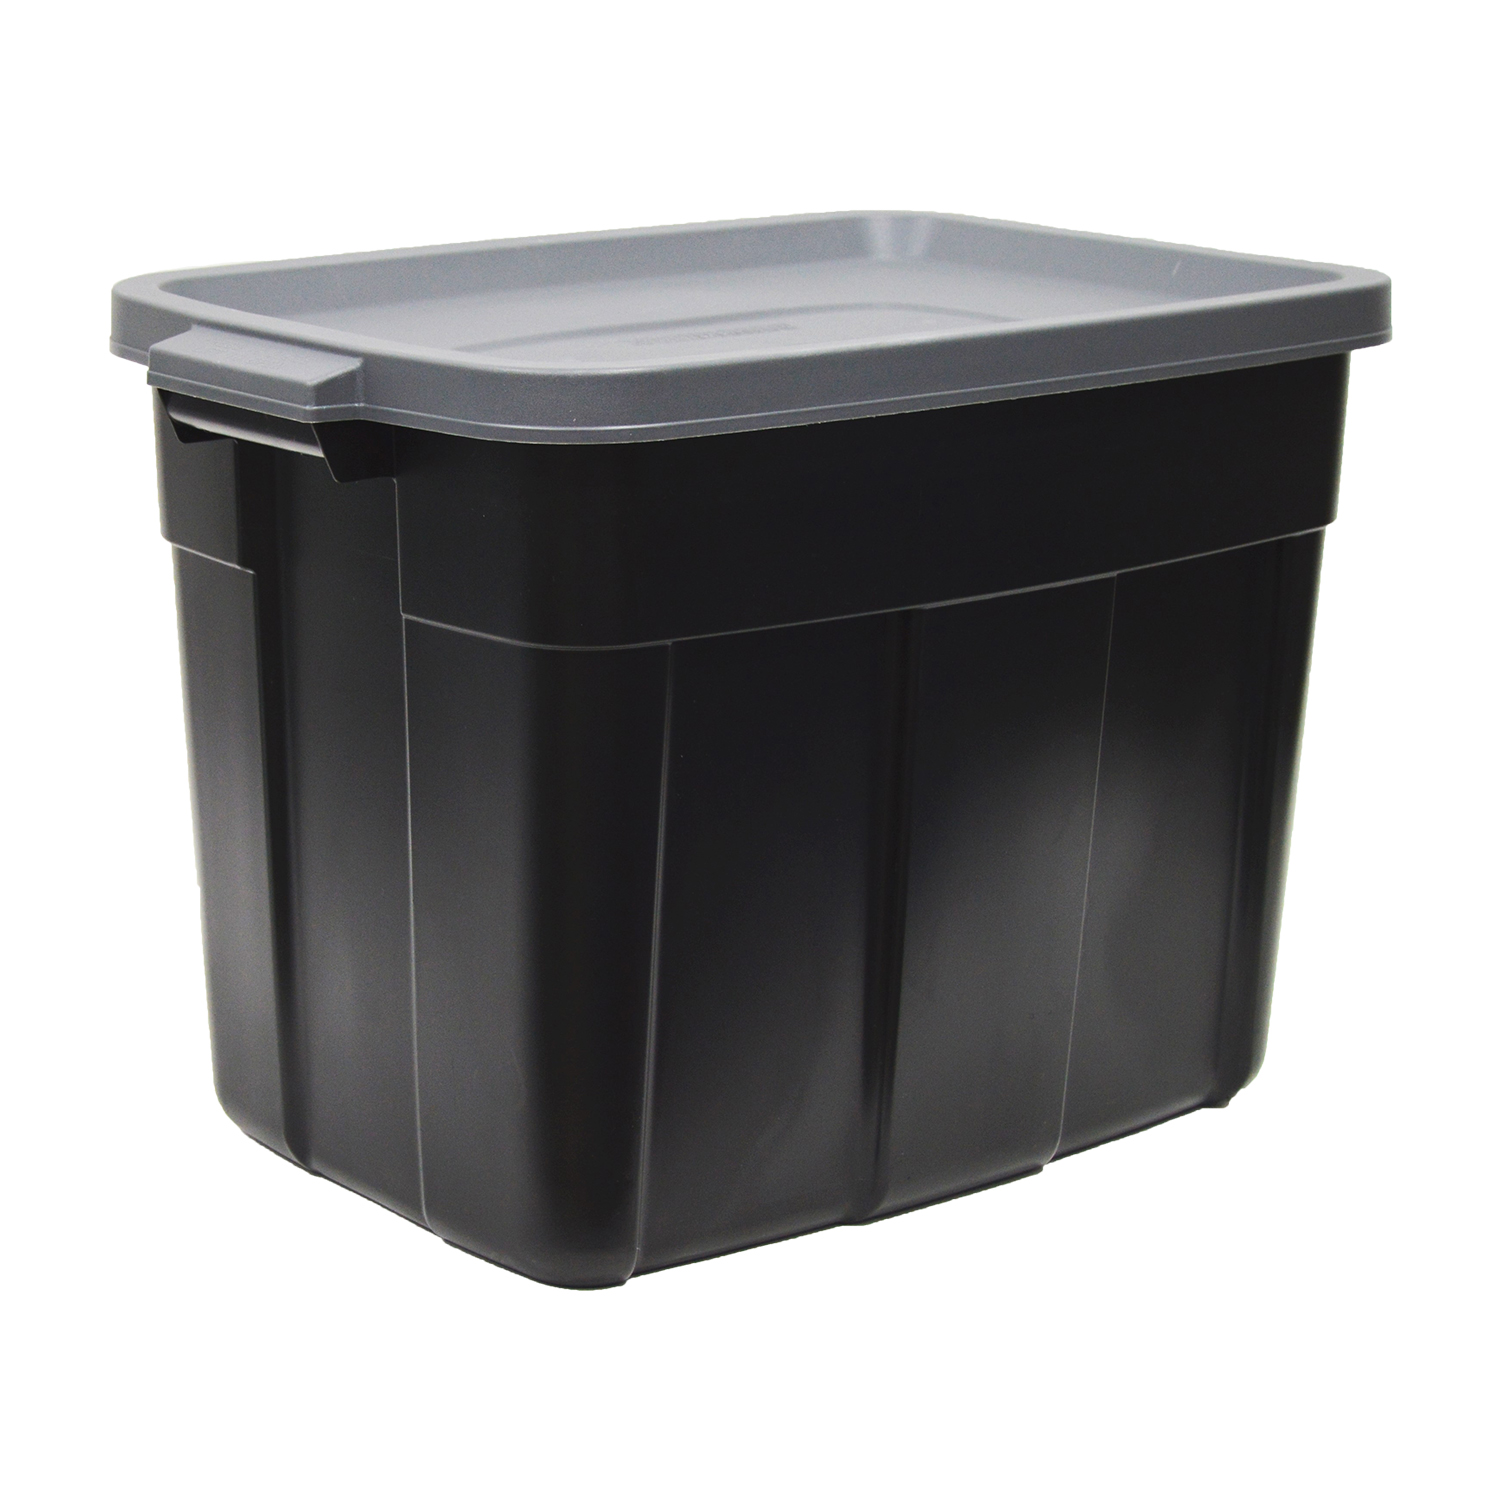 Rubbermaid Roughneck Tote 18 Gallon Storage Bin Container, Black (6 Pack) - image 5 of 6